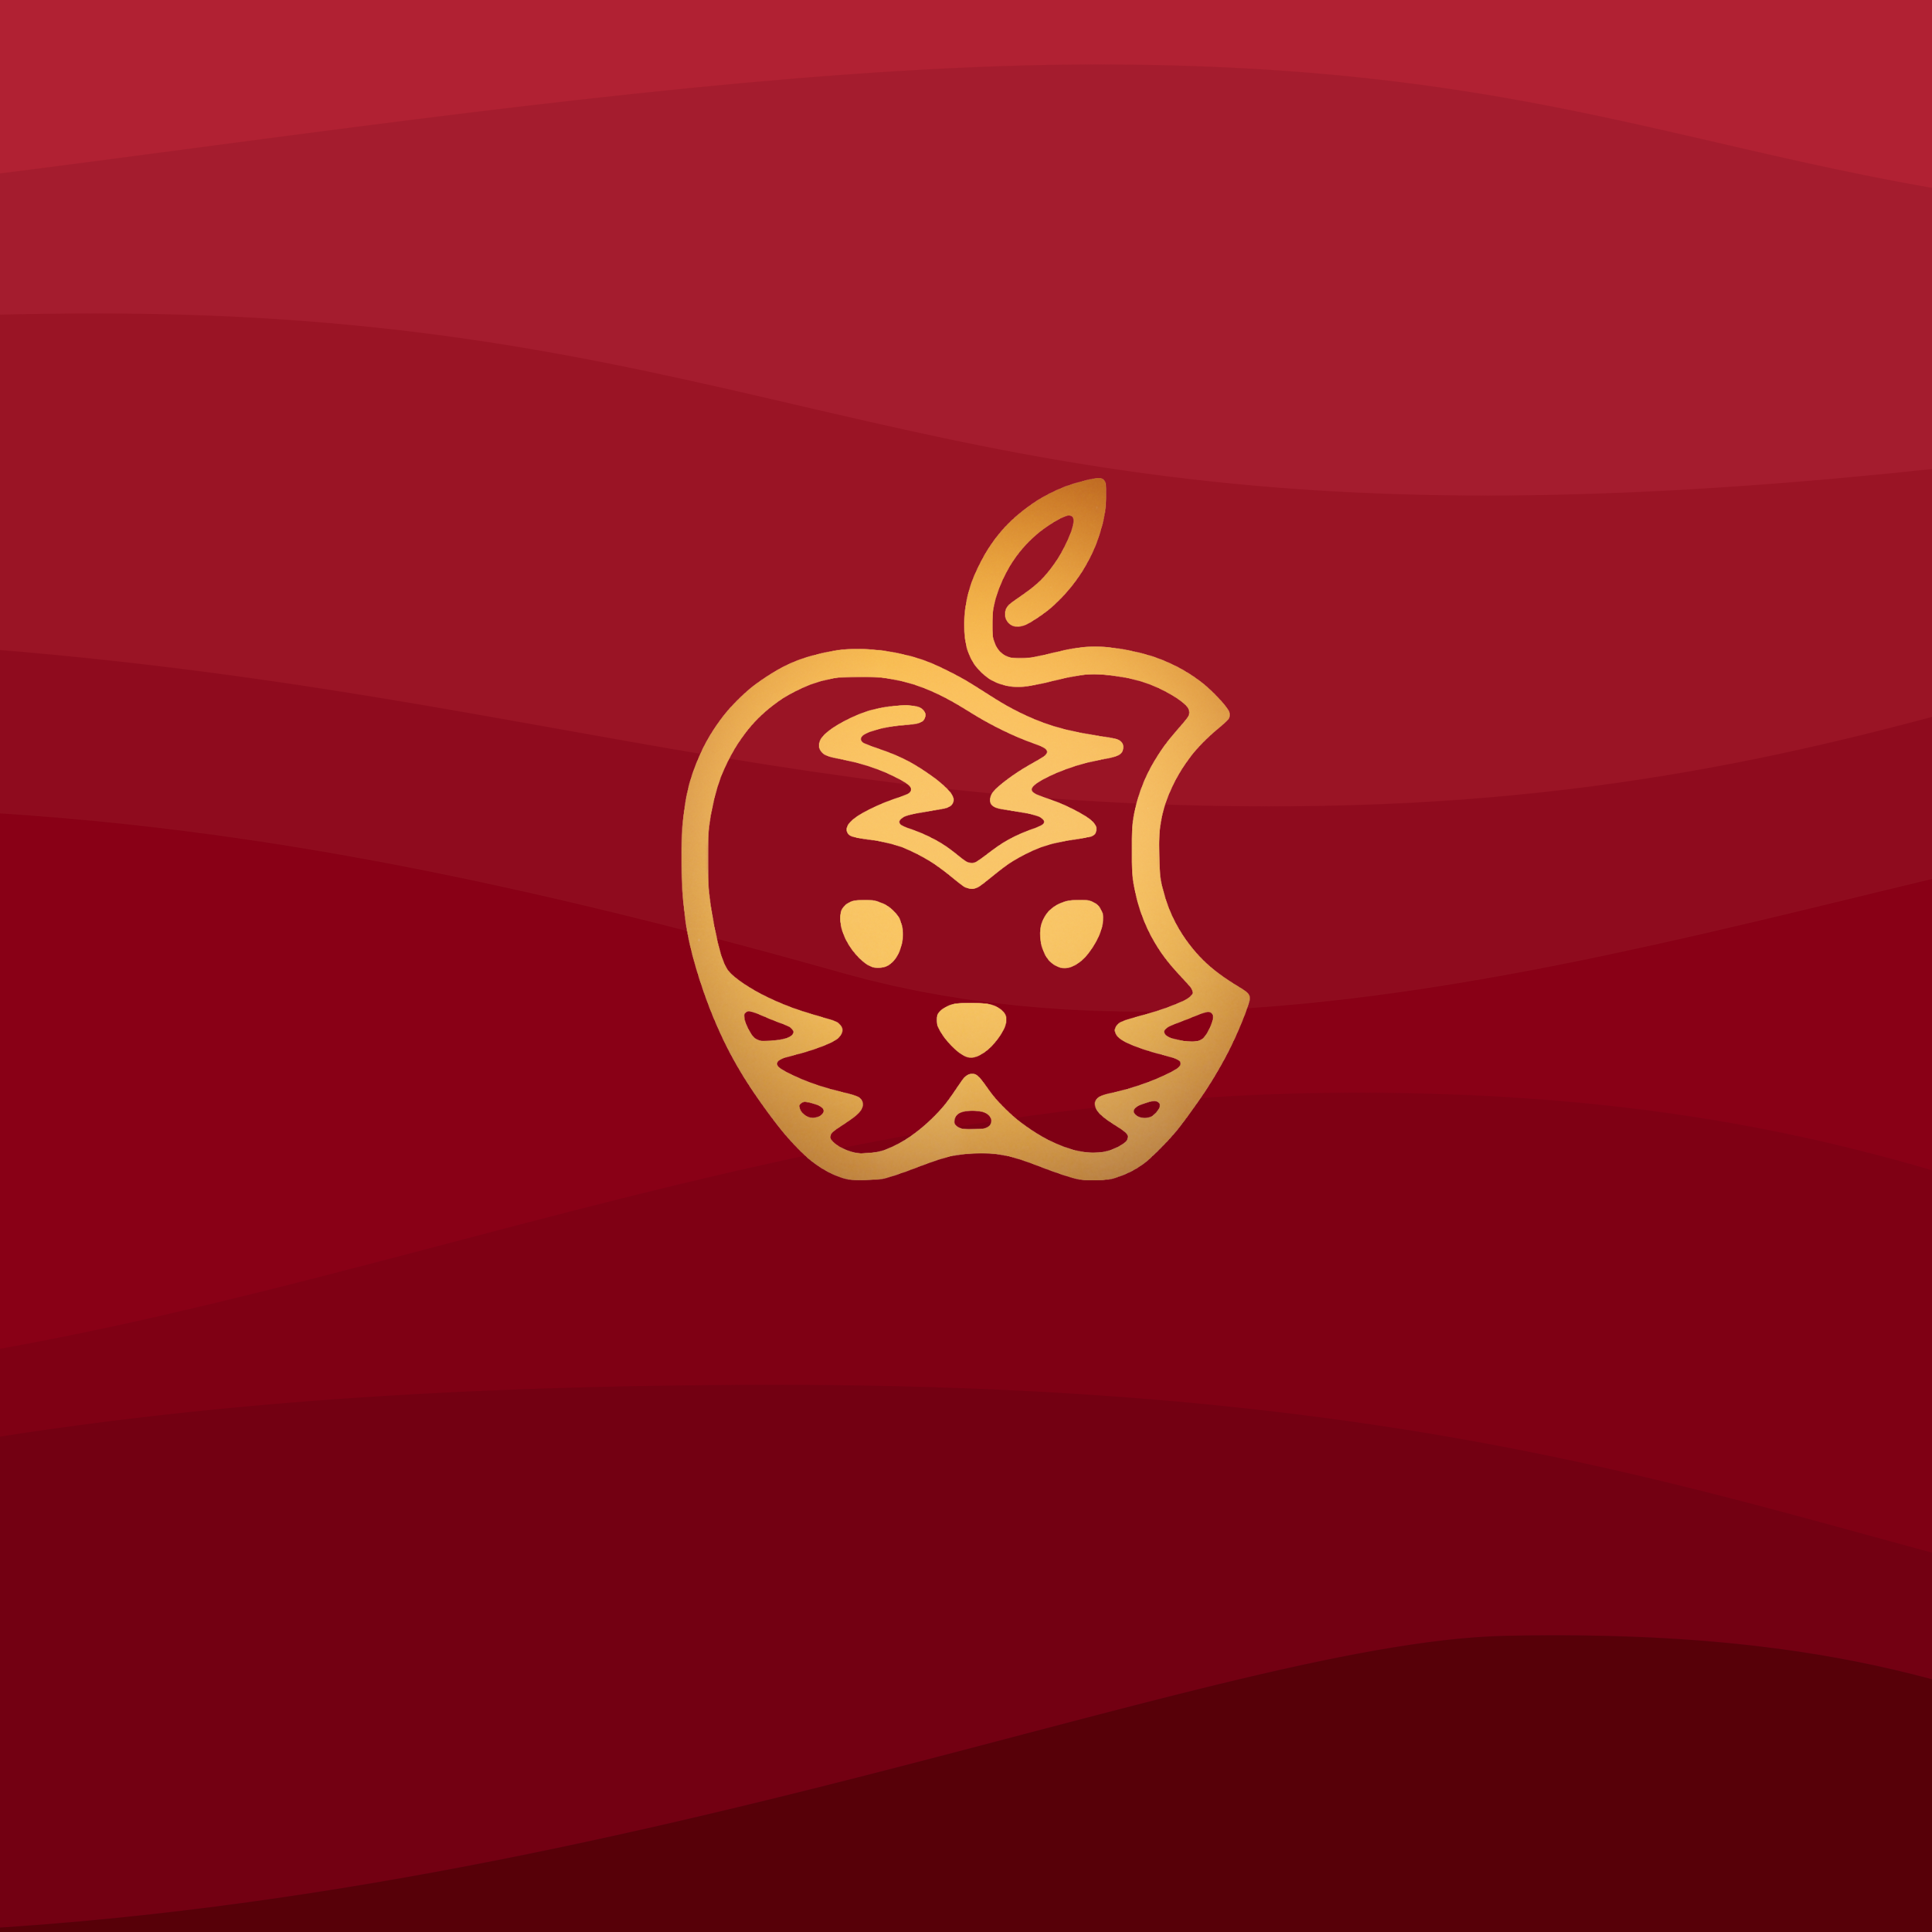 Year of the Tiger Apple Wallpapers — Basic Apple Guy